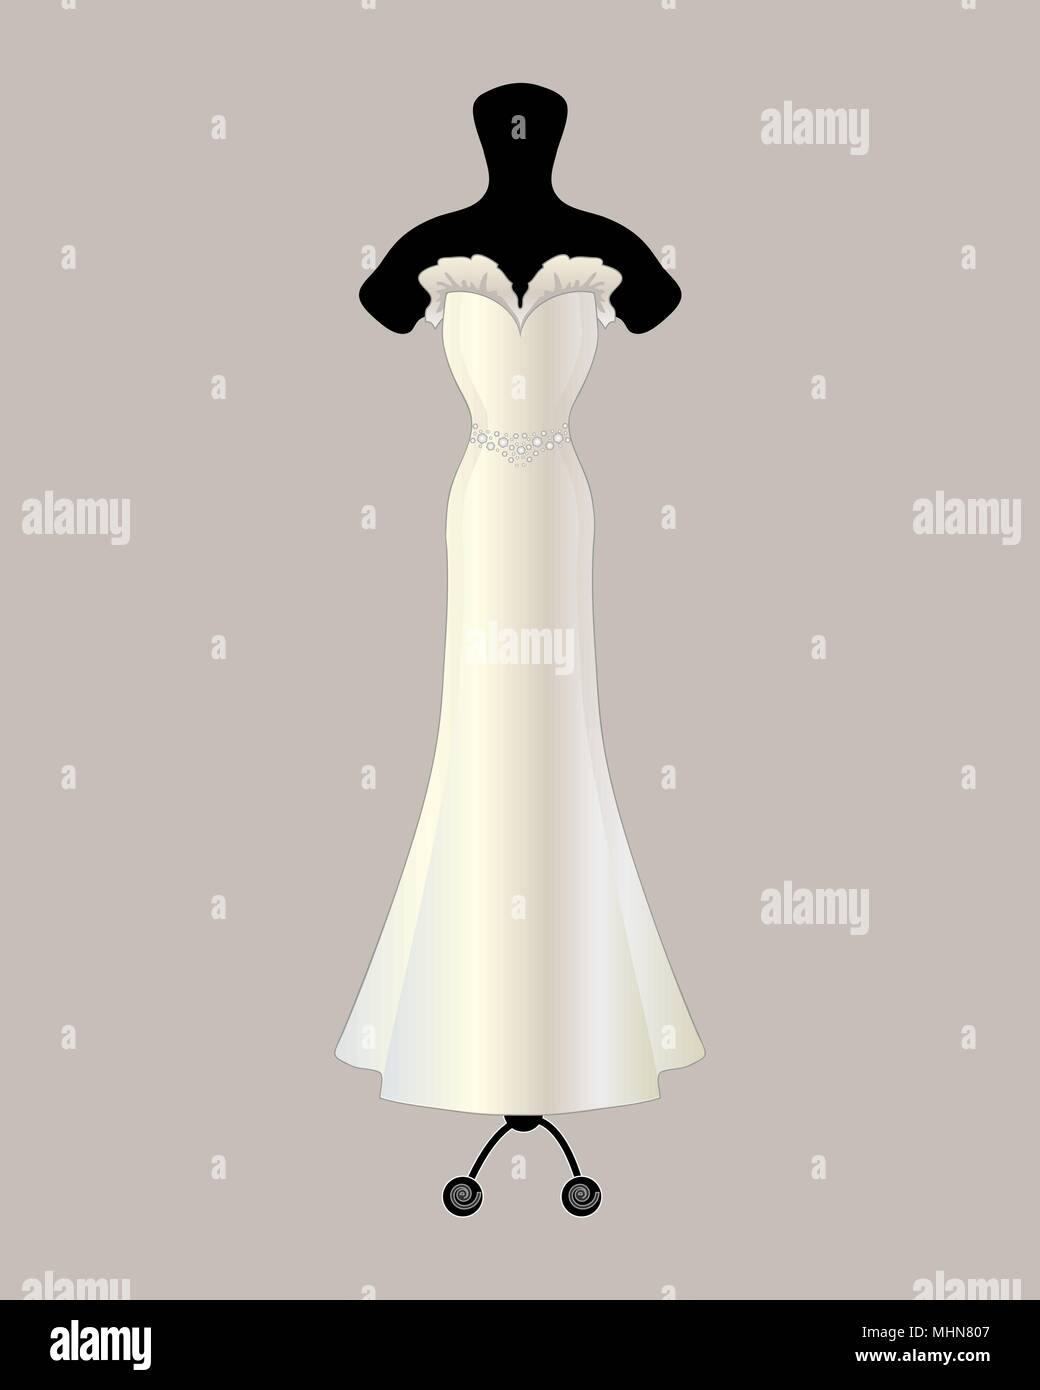 a vector illustration in eps 10 format of a beautiful designer satin wedding dress in a trumpet style with ruffle detail and jeweled belt Stock Vector